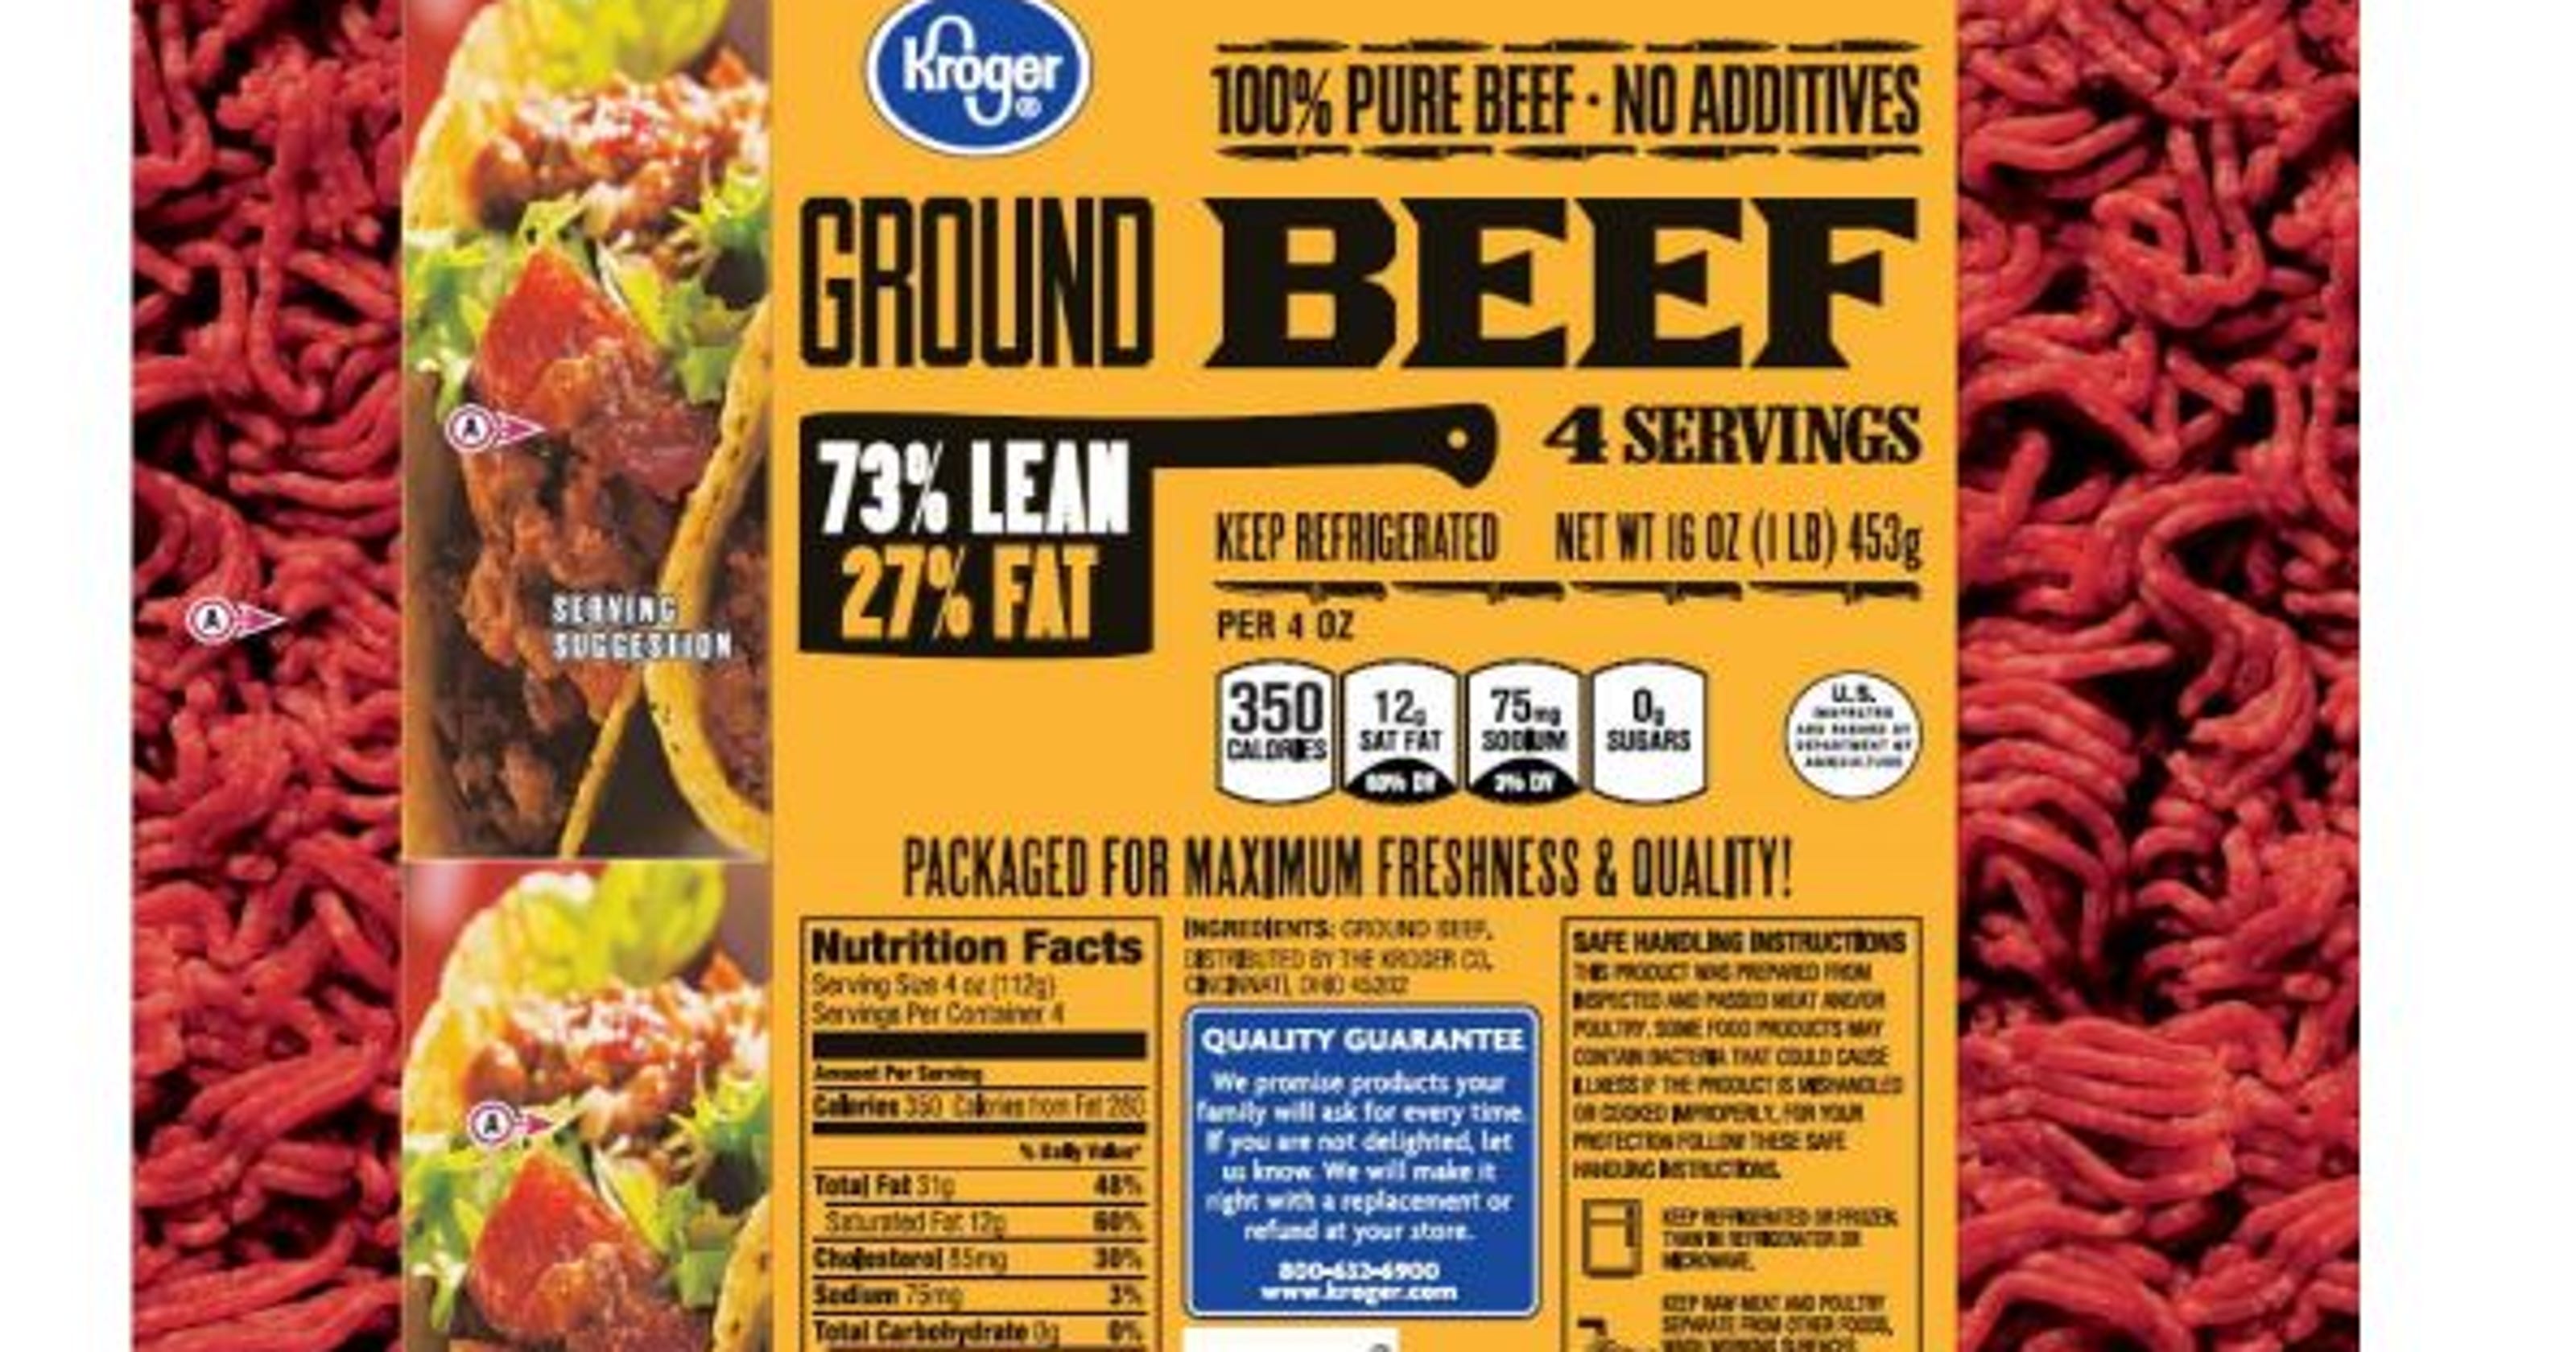 JBS Tolleson ground beef recall Kroger product contained salmonella